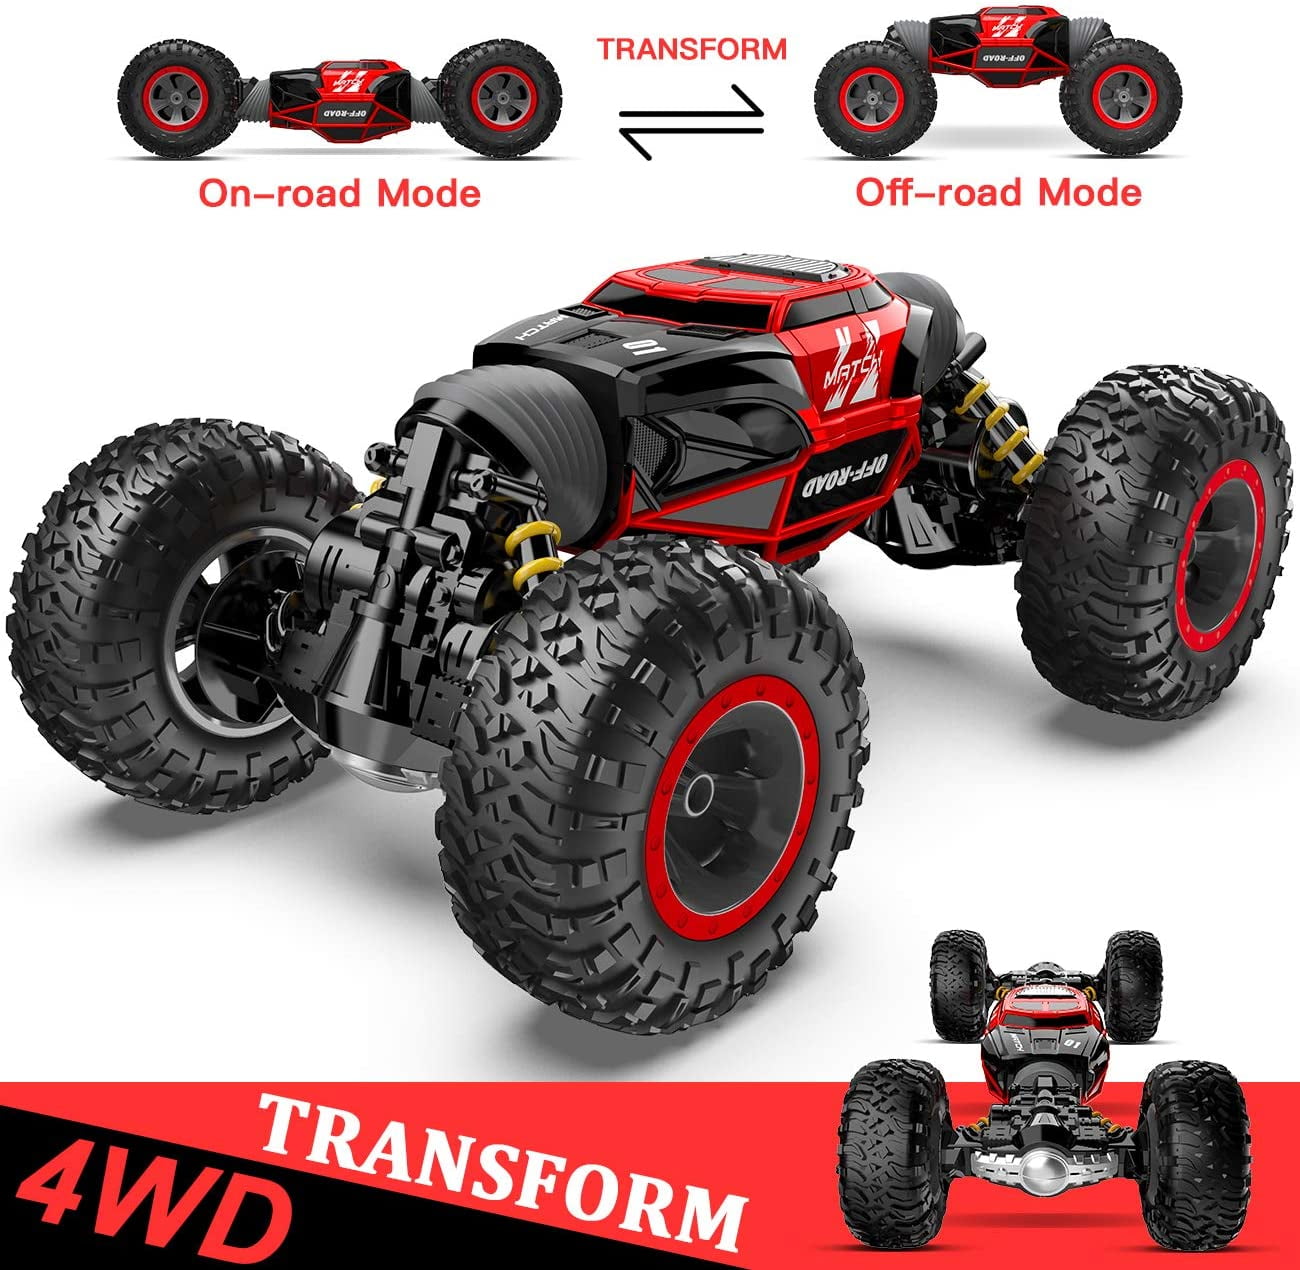 BEZGAR Remote Control Monster Truck Remote Control Cars, RC Truck Toy Car for Adults Boys Kids 6+, All Terrain Speed Transform Crawler RC Stunt Car